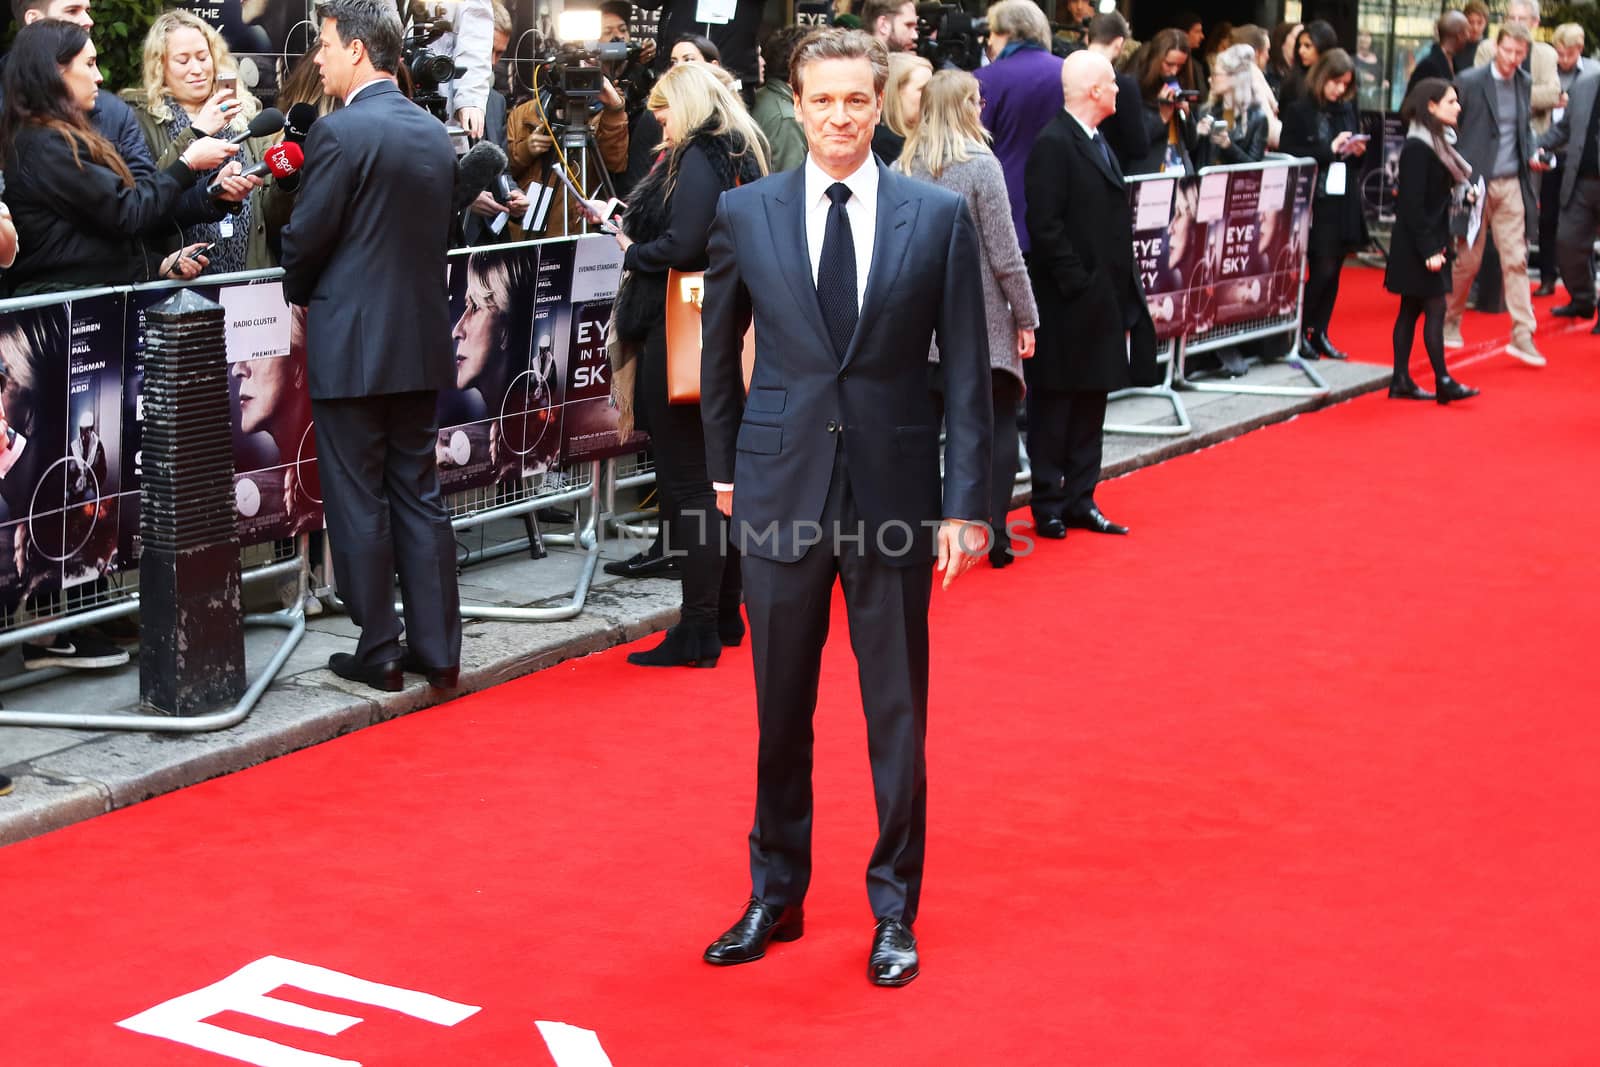 UK, London: Colin Firth arrives on the red carpet on April 11, 2016 for the premiere of Eye in the Sky at Curzon Mayfair Cinema in London.